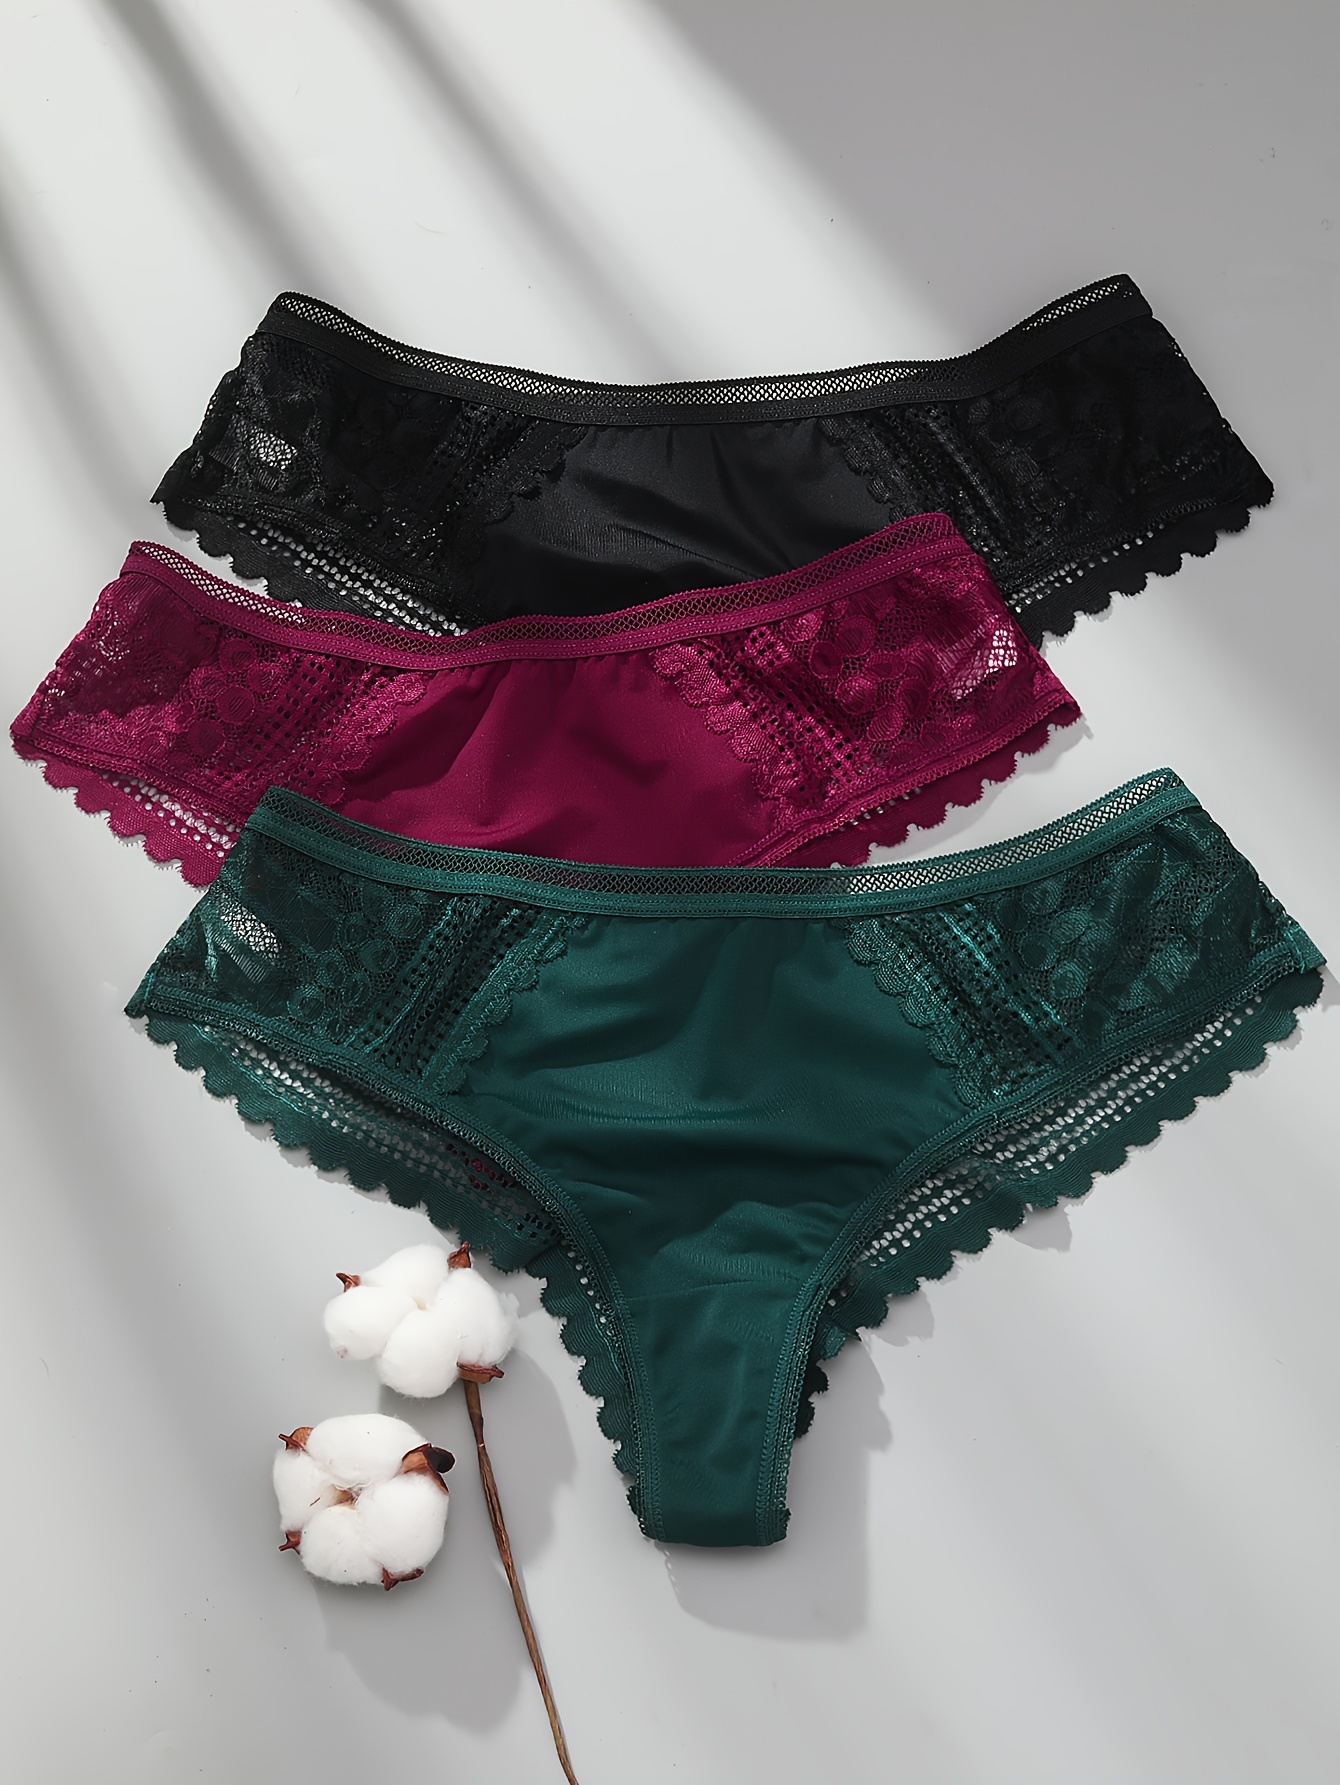 Comfortable and Stylish Low-Rise Stretch Panties for Women